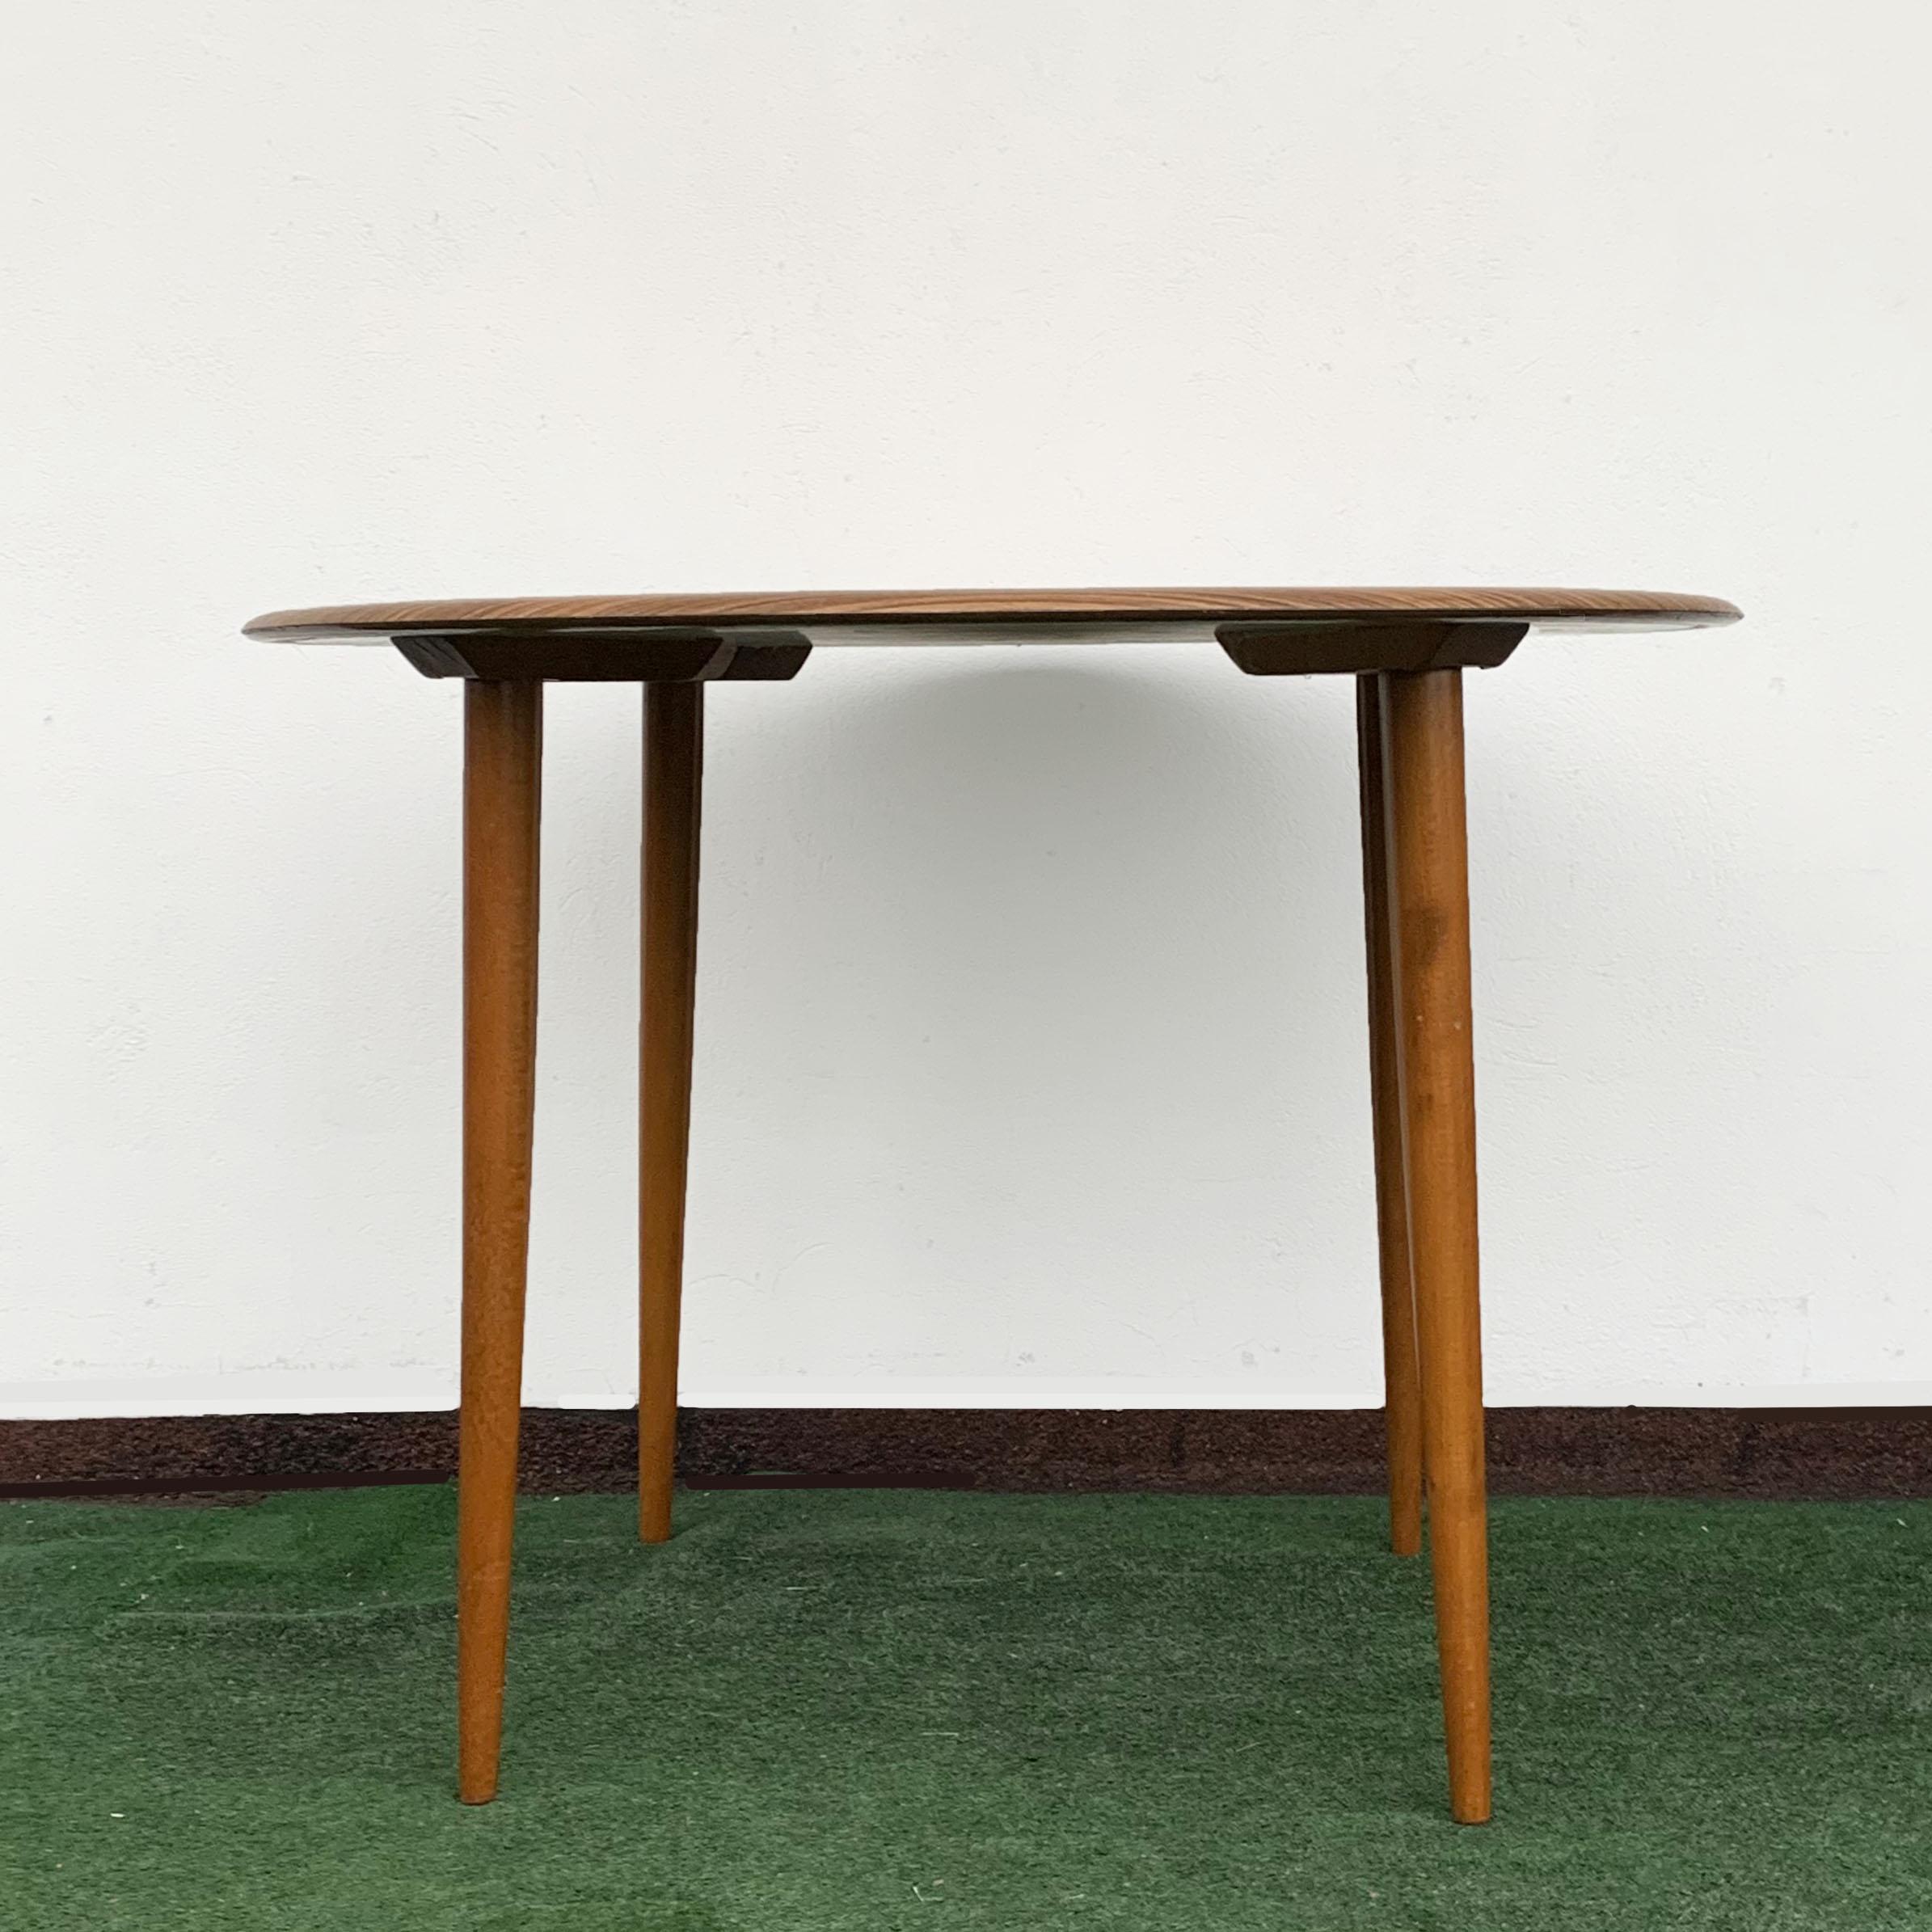 Round table by Opal Kleinmöbel. Danish vintage. A Classic design German item from the 1960s.

All legs are removable, making this very special table easy to move or store. 

The item is sold with the original sticker with its serial number. A